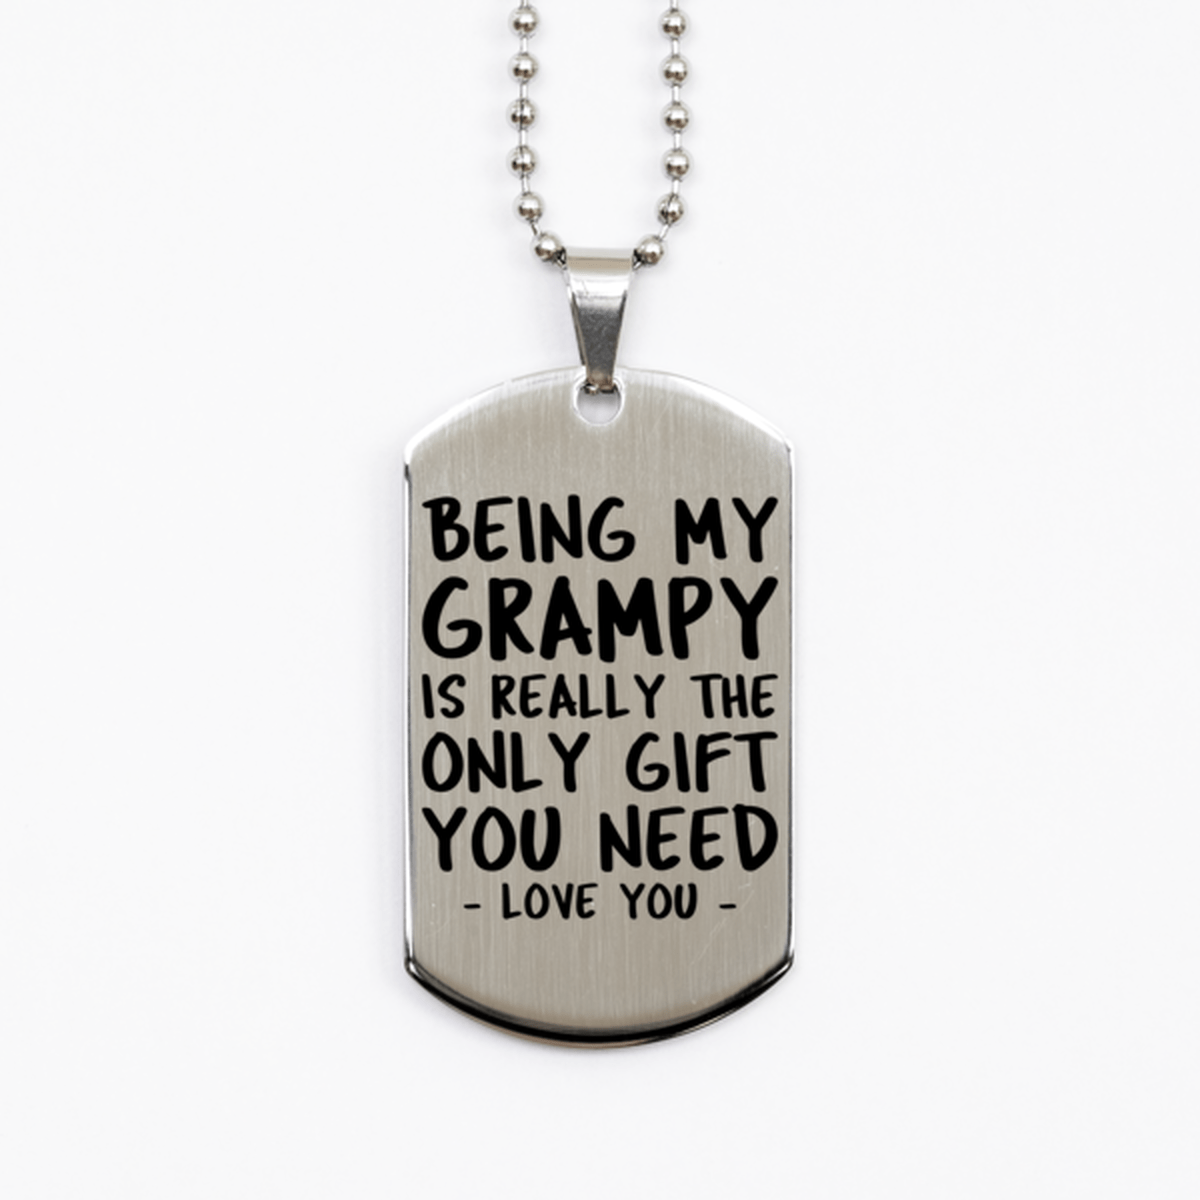 Funny Grampy Silver Dog Tag Necklace, Being My Grampy Is Really the Only Gift You Need, Best Birthday Gifts for Grampy